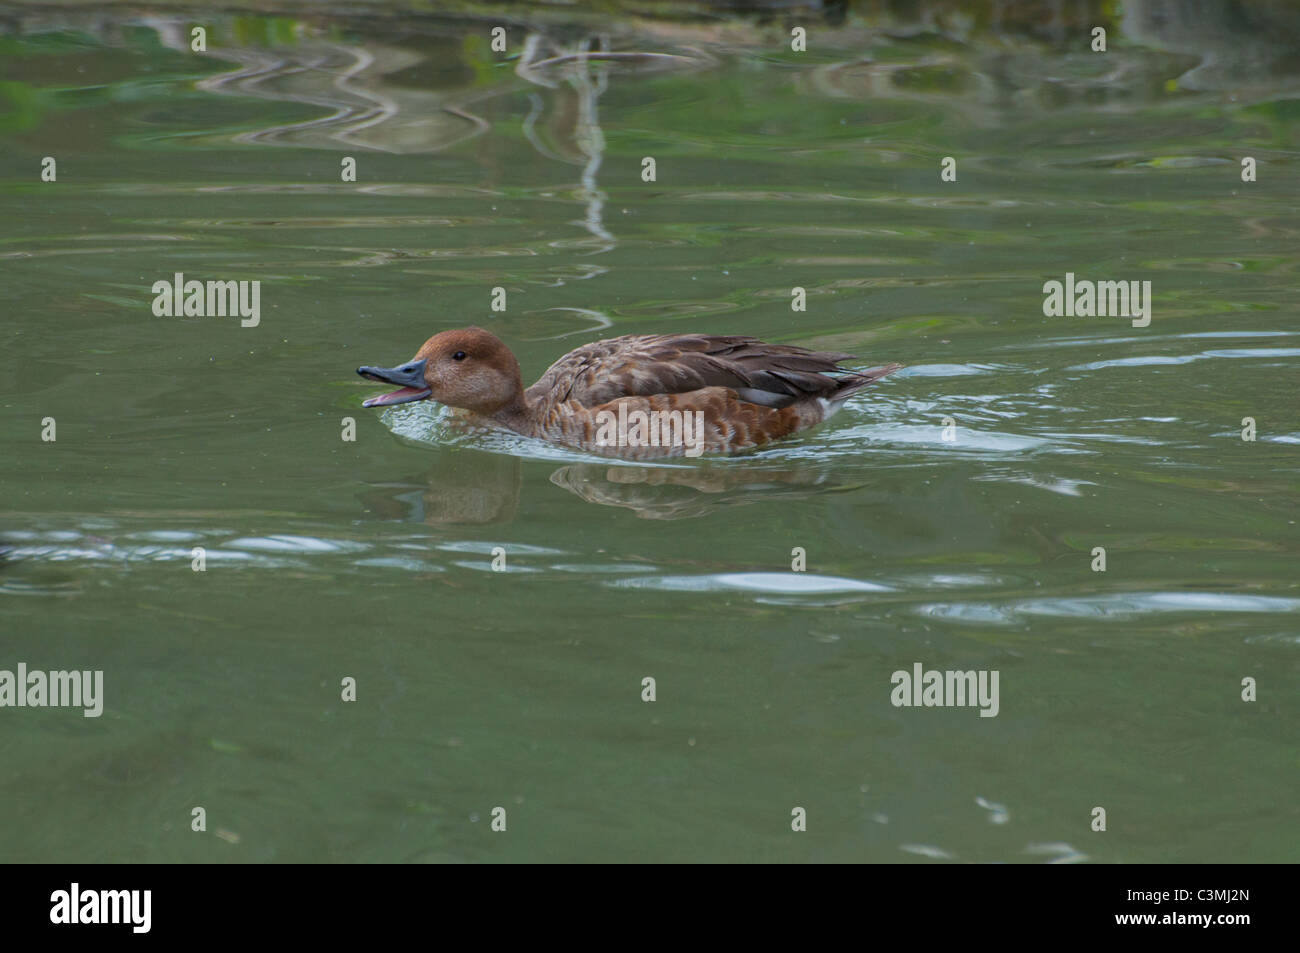 An angry Duck chasing another. Stock Photo